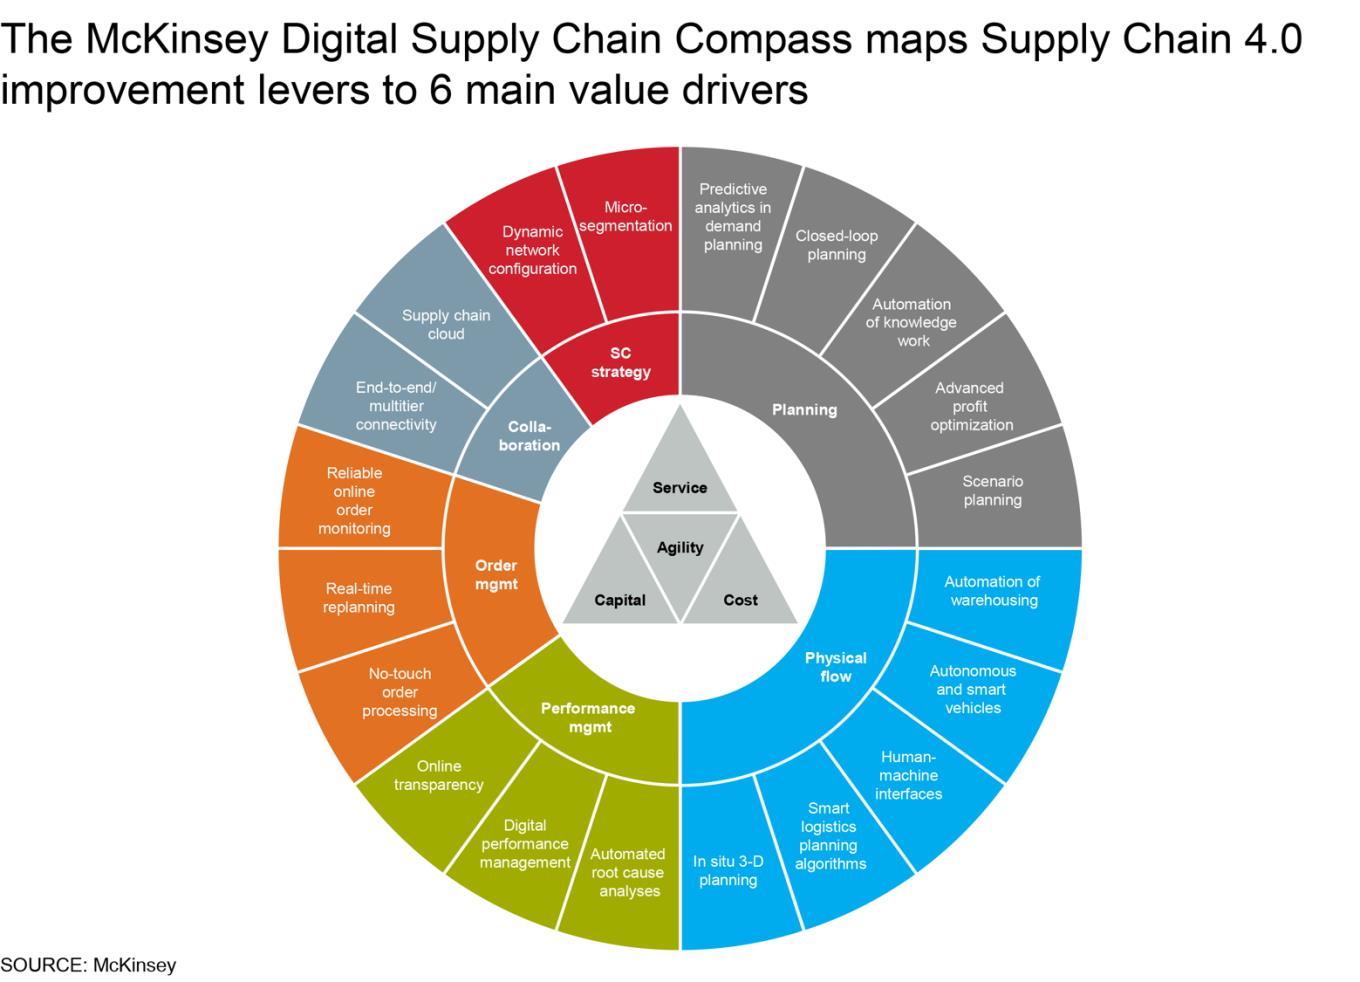 supply chain 4.0 improvment levers